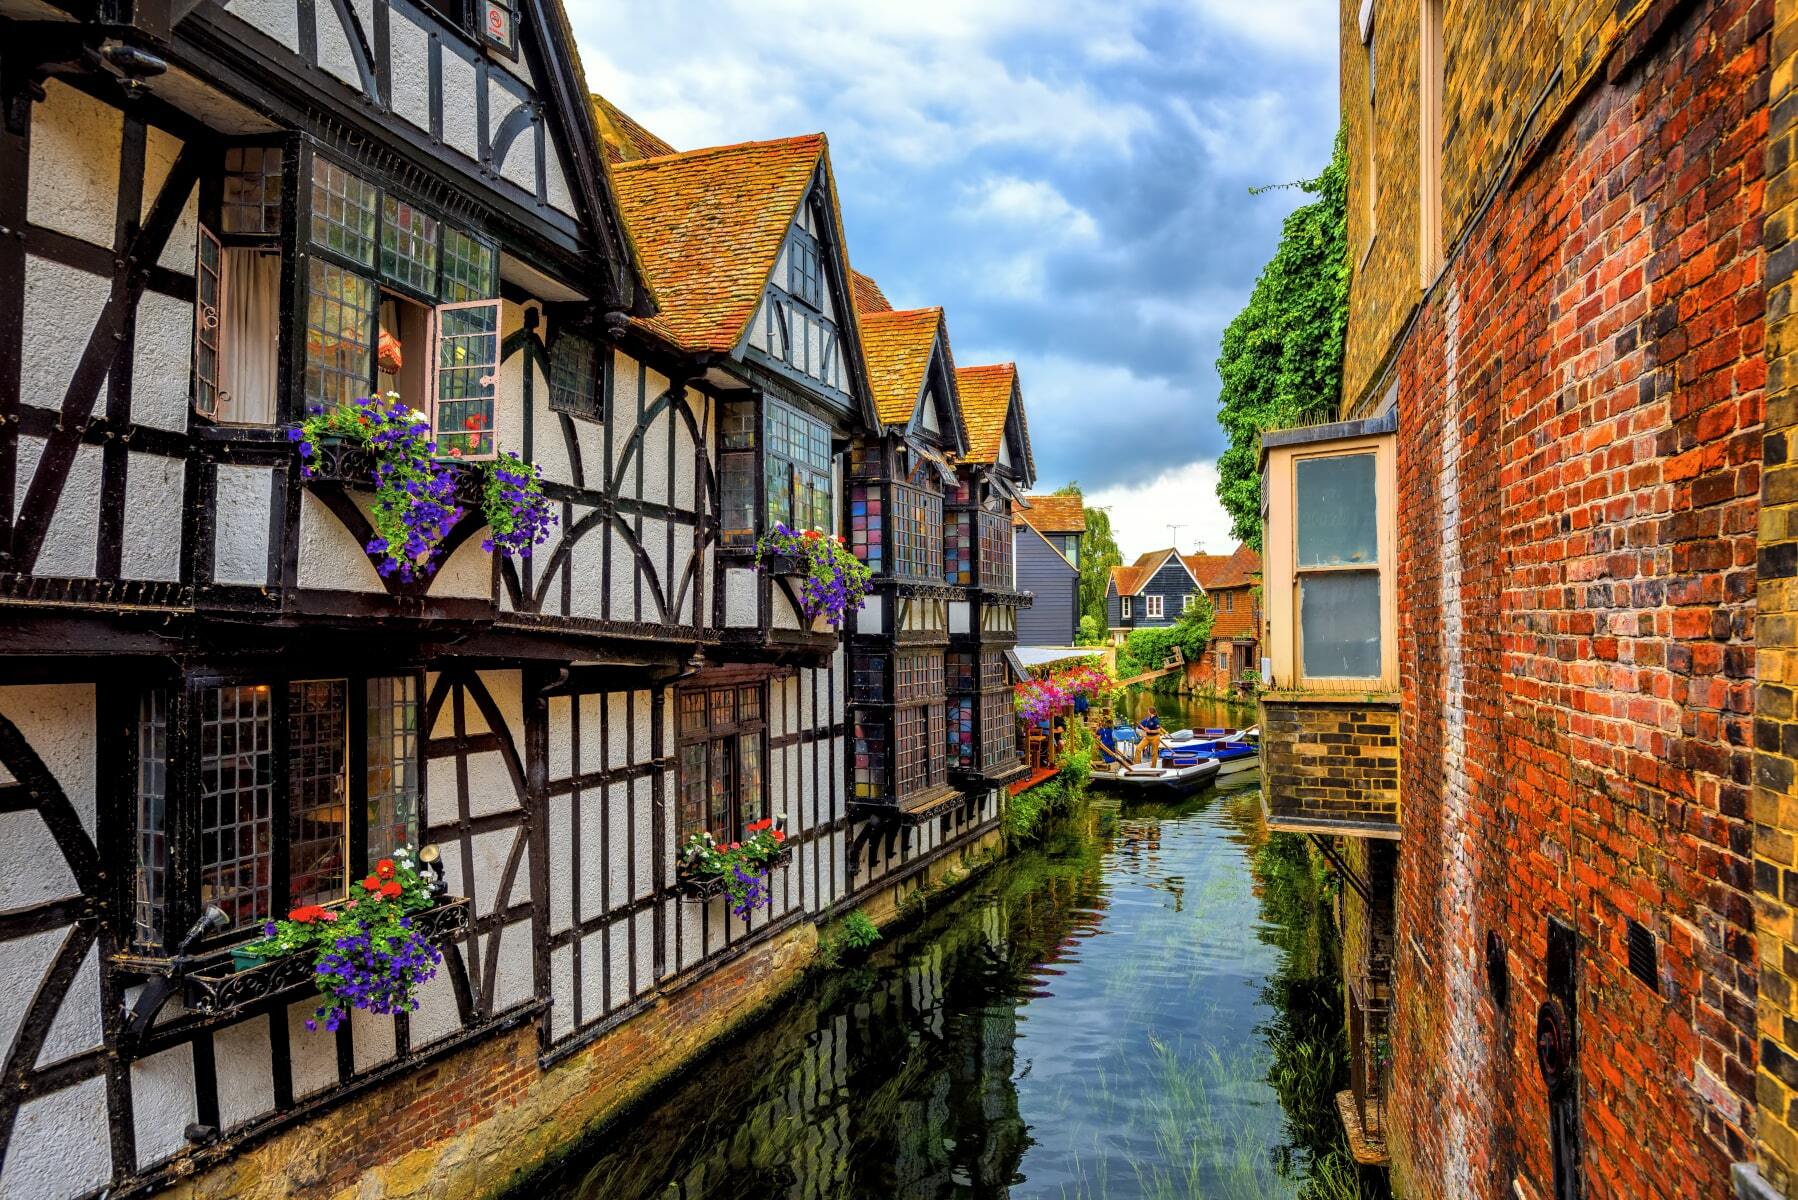 <p>Thanks to its well-preserved medieval quarter, the university town of <a href="https://www.visitbritain.com/ca/en/england/southeast/canterbury" class="atom_link atom_valid" rel="noreferrer noopener">Canterbury</a> is a perfect destination for tourists. It houses the ruins of Canterbury Castle, St. Augustine’s Abbey, and a gorgeous cathedral that’s listed as a UNESCO World Heritage Site. It’s also where King Henry IV is buried and where Archbishop Thomas Becket was murdered in the 12th century.</p>